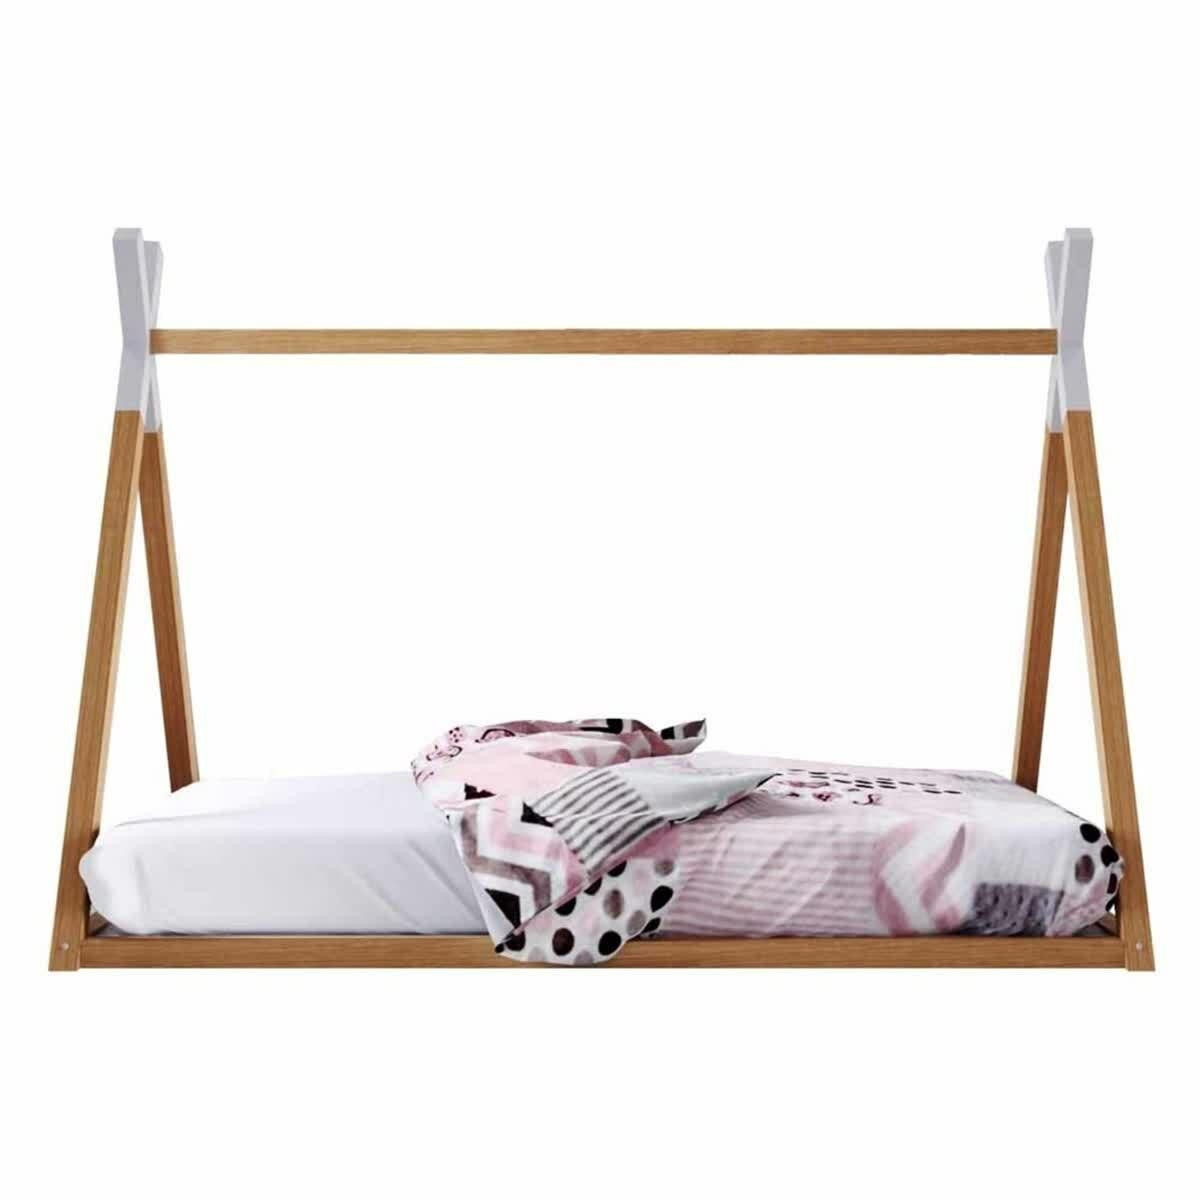 Helena Teepee Pine Timber Single Bed for Kids - Natural